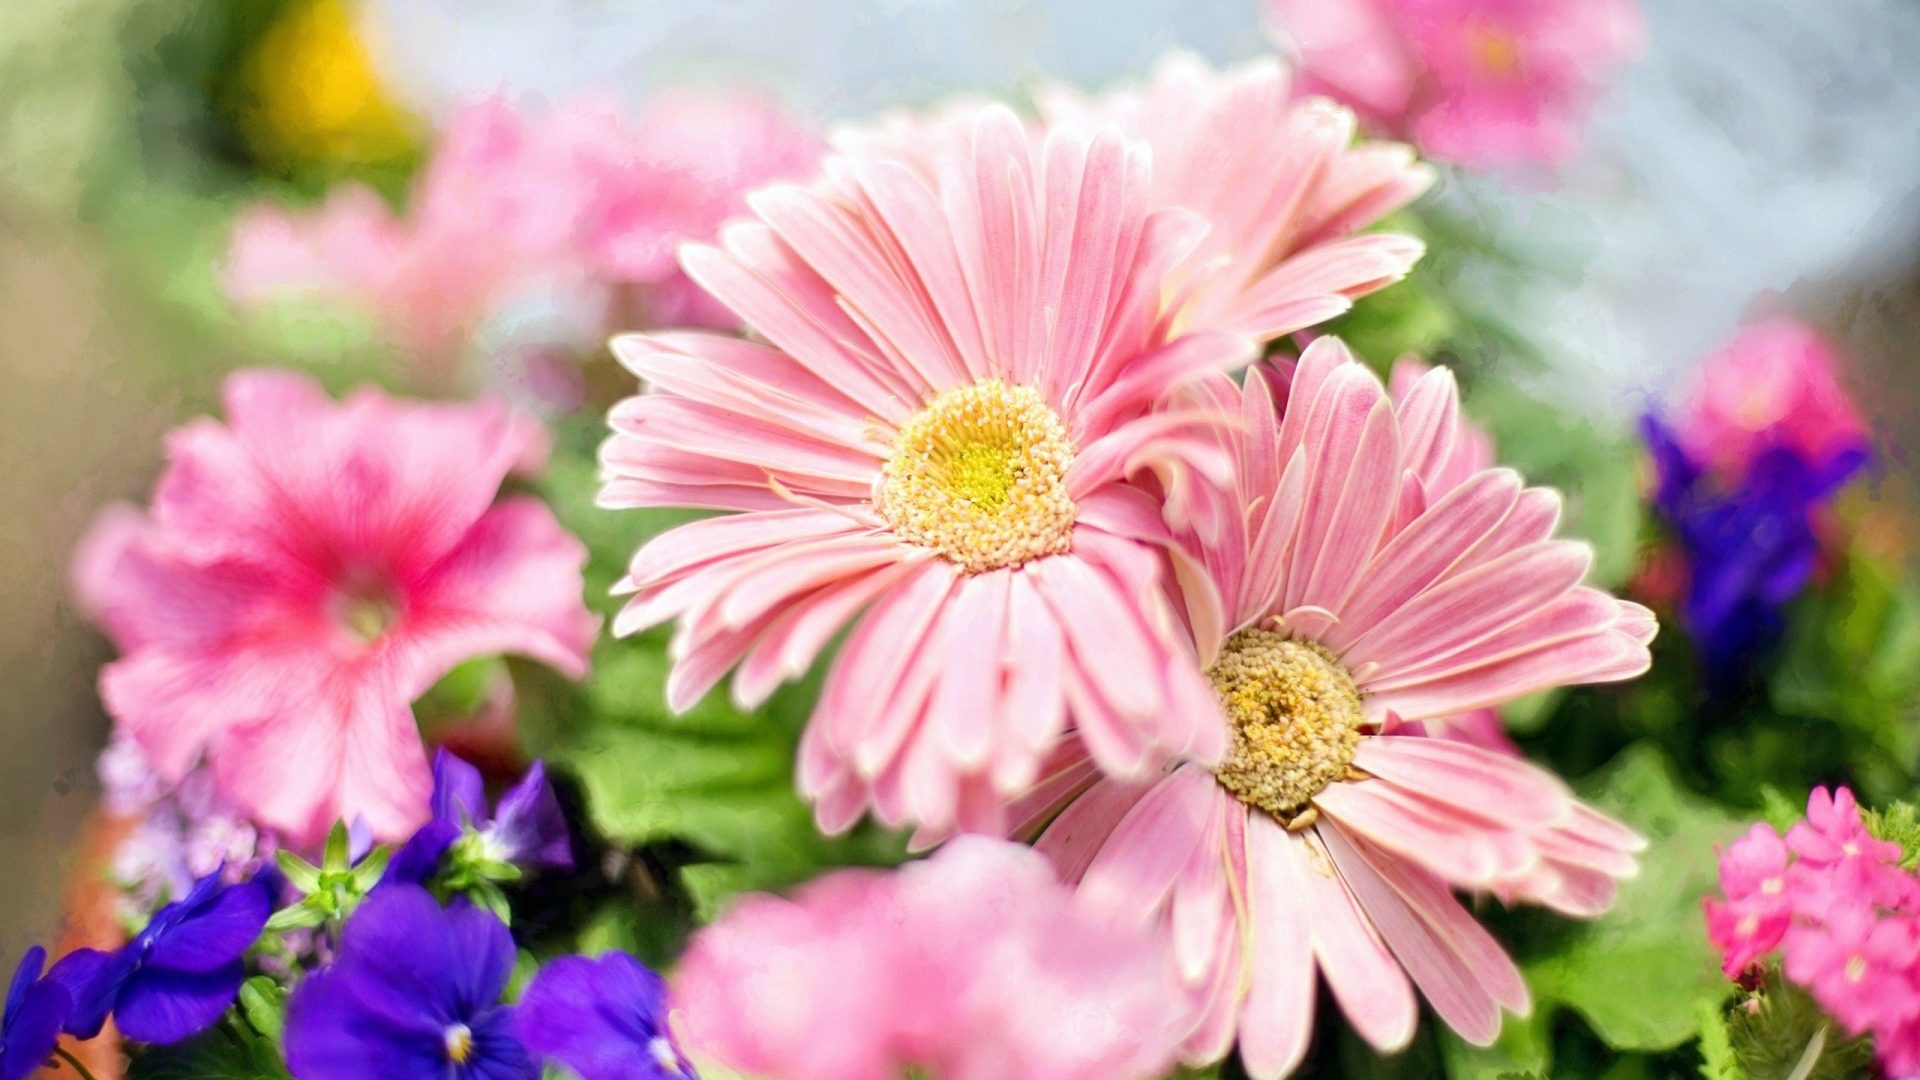 Beautiful Flower Wallpapers For Facebook|http ...